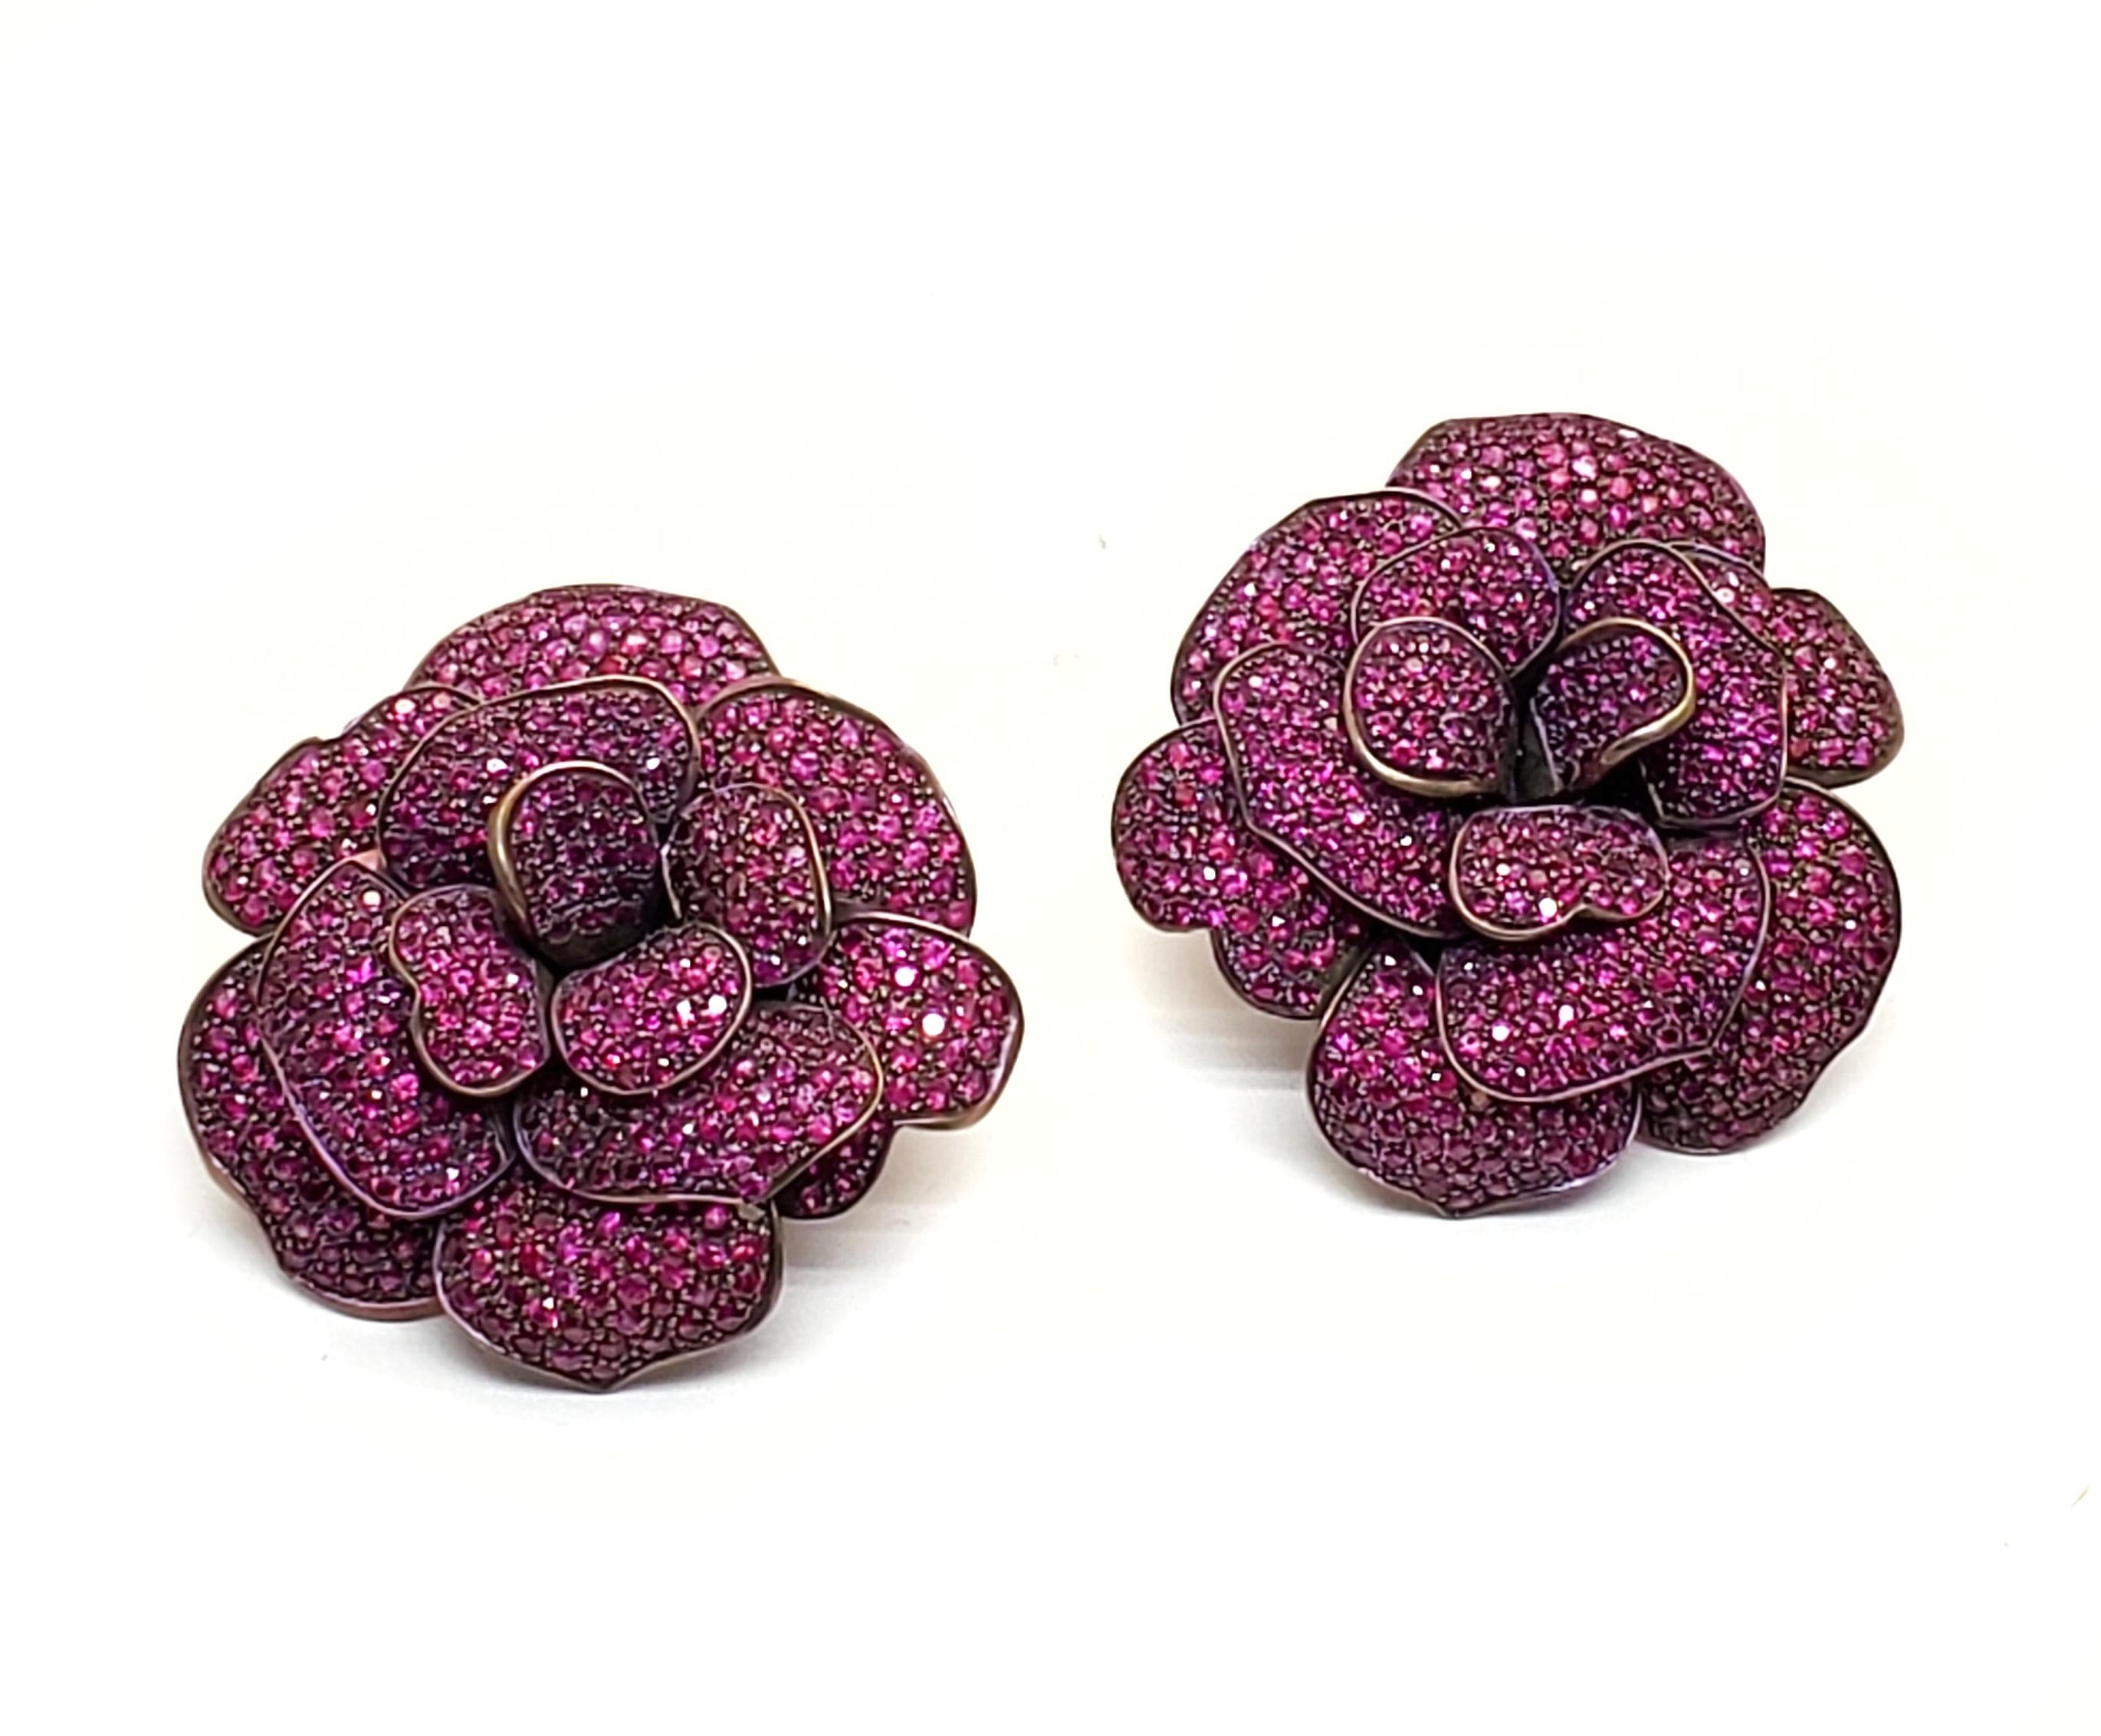 Andreoli Pink Sapphire Titanium Flower Clip On Earrings  

Andreoli was one of the first jewelry creators to utilize titanium in high jewelry over 18KT or Platinum. The use of titanium allows for bigger and bolder designs without compromising on the